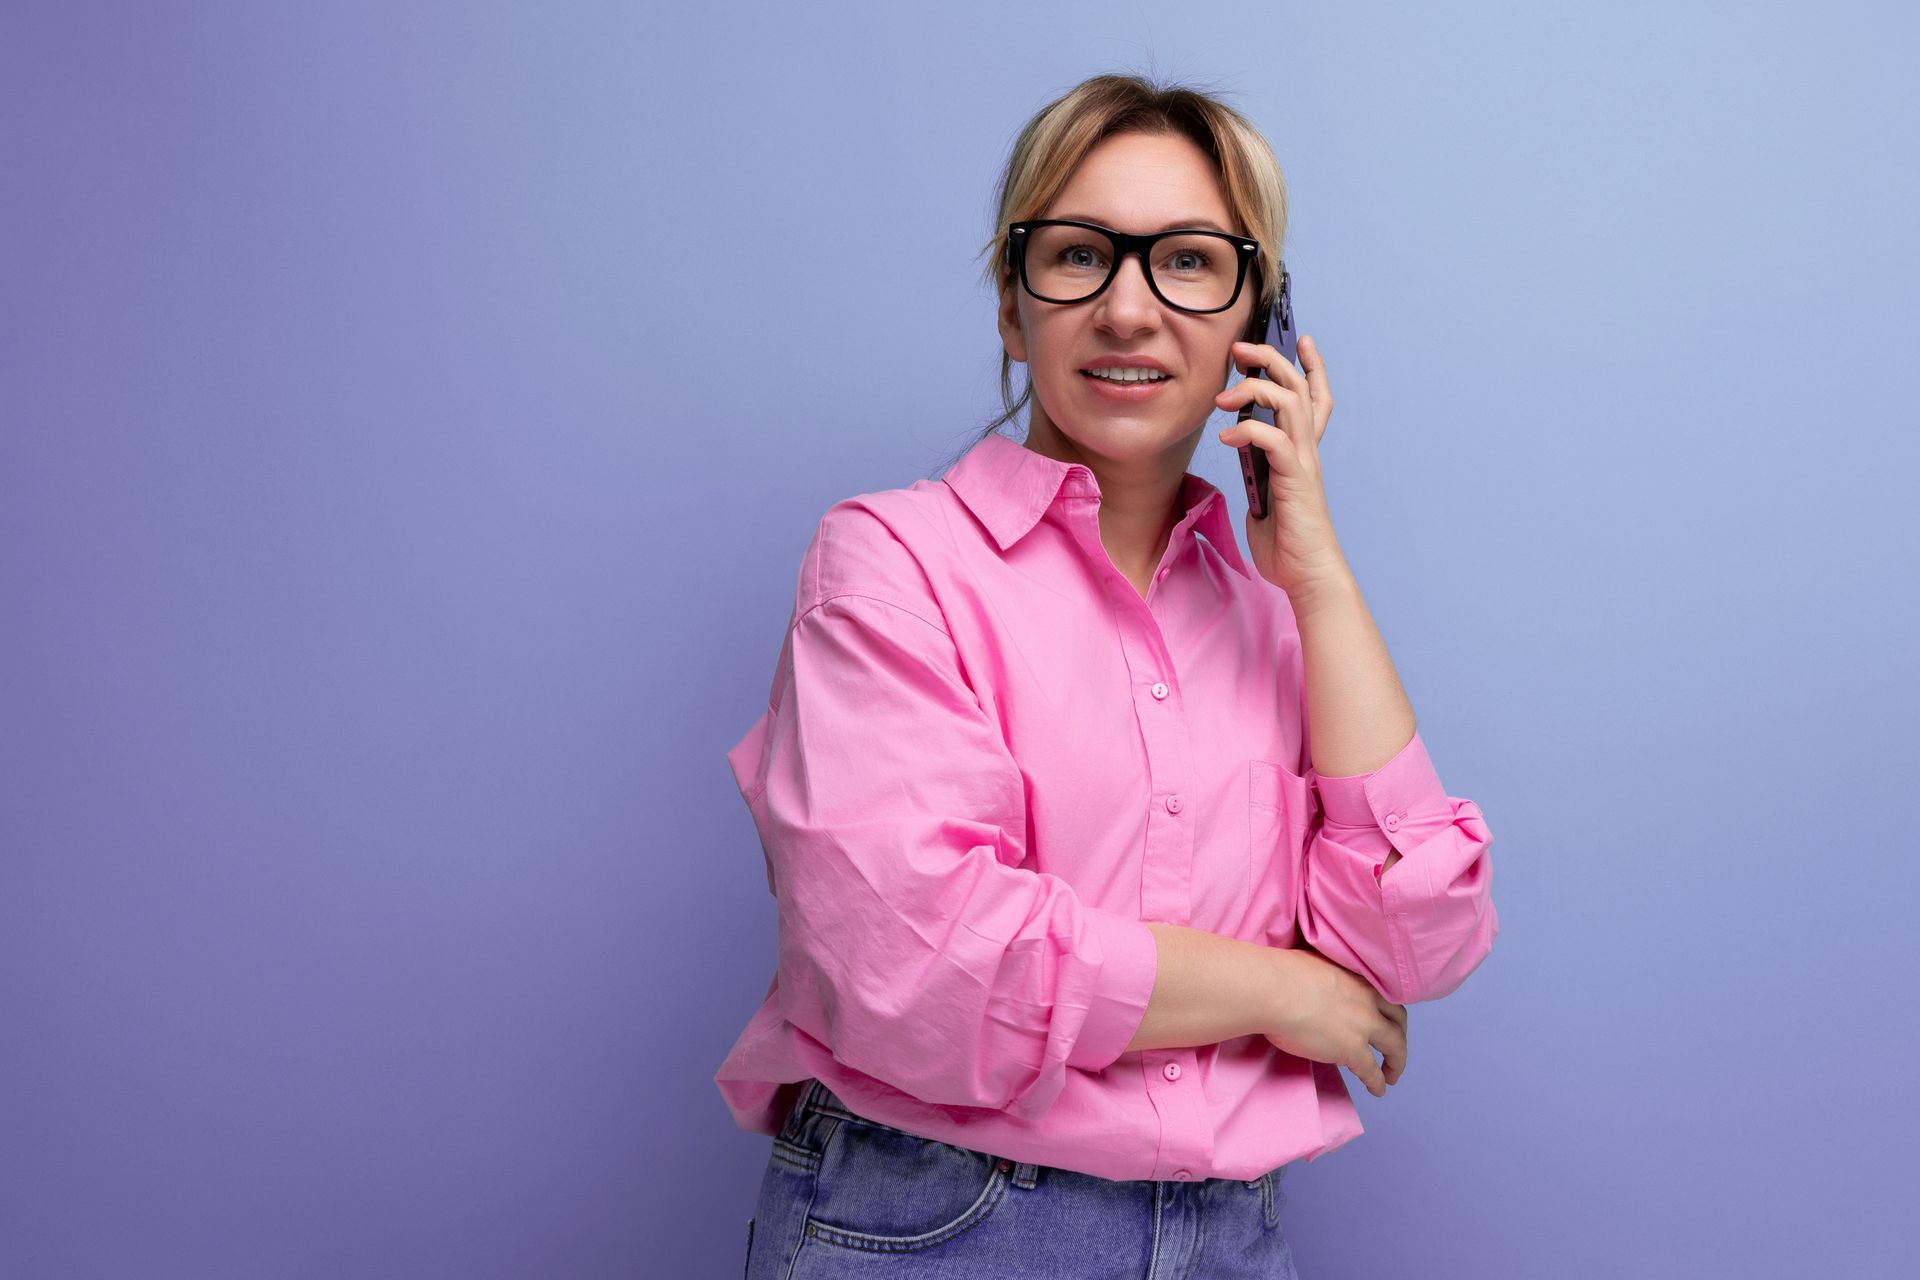 a woman wearing glasses and a pink shirt is talking on a cell phone